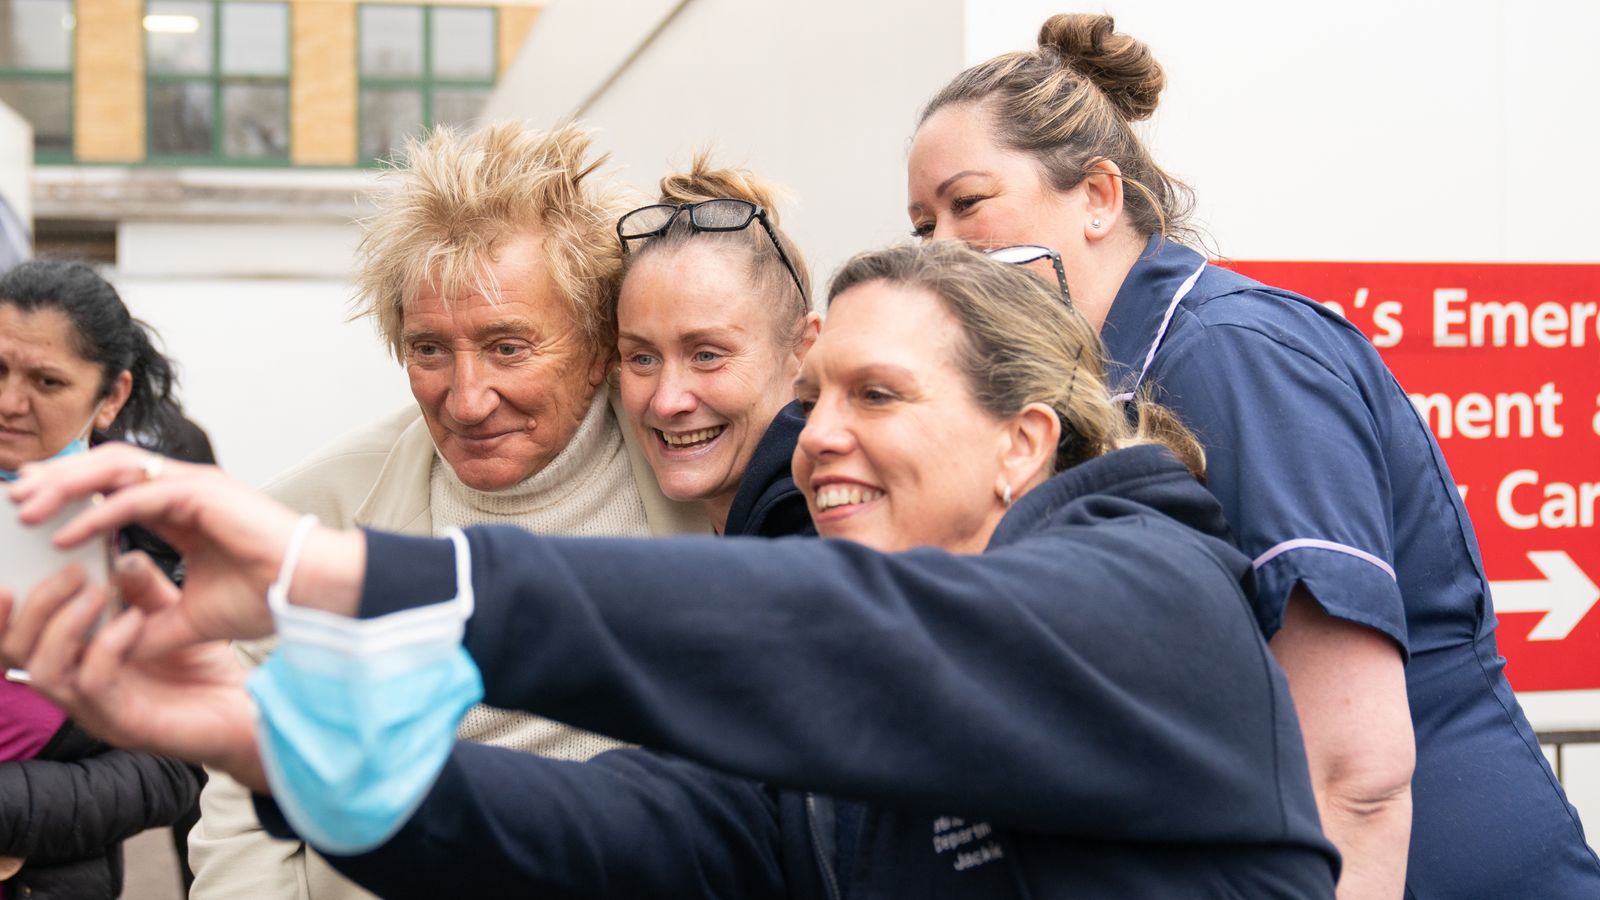 Sir Rod Stewart pays for patients' scans as he calls for nurses' wages to rise